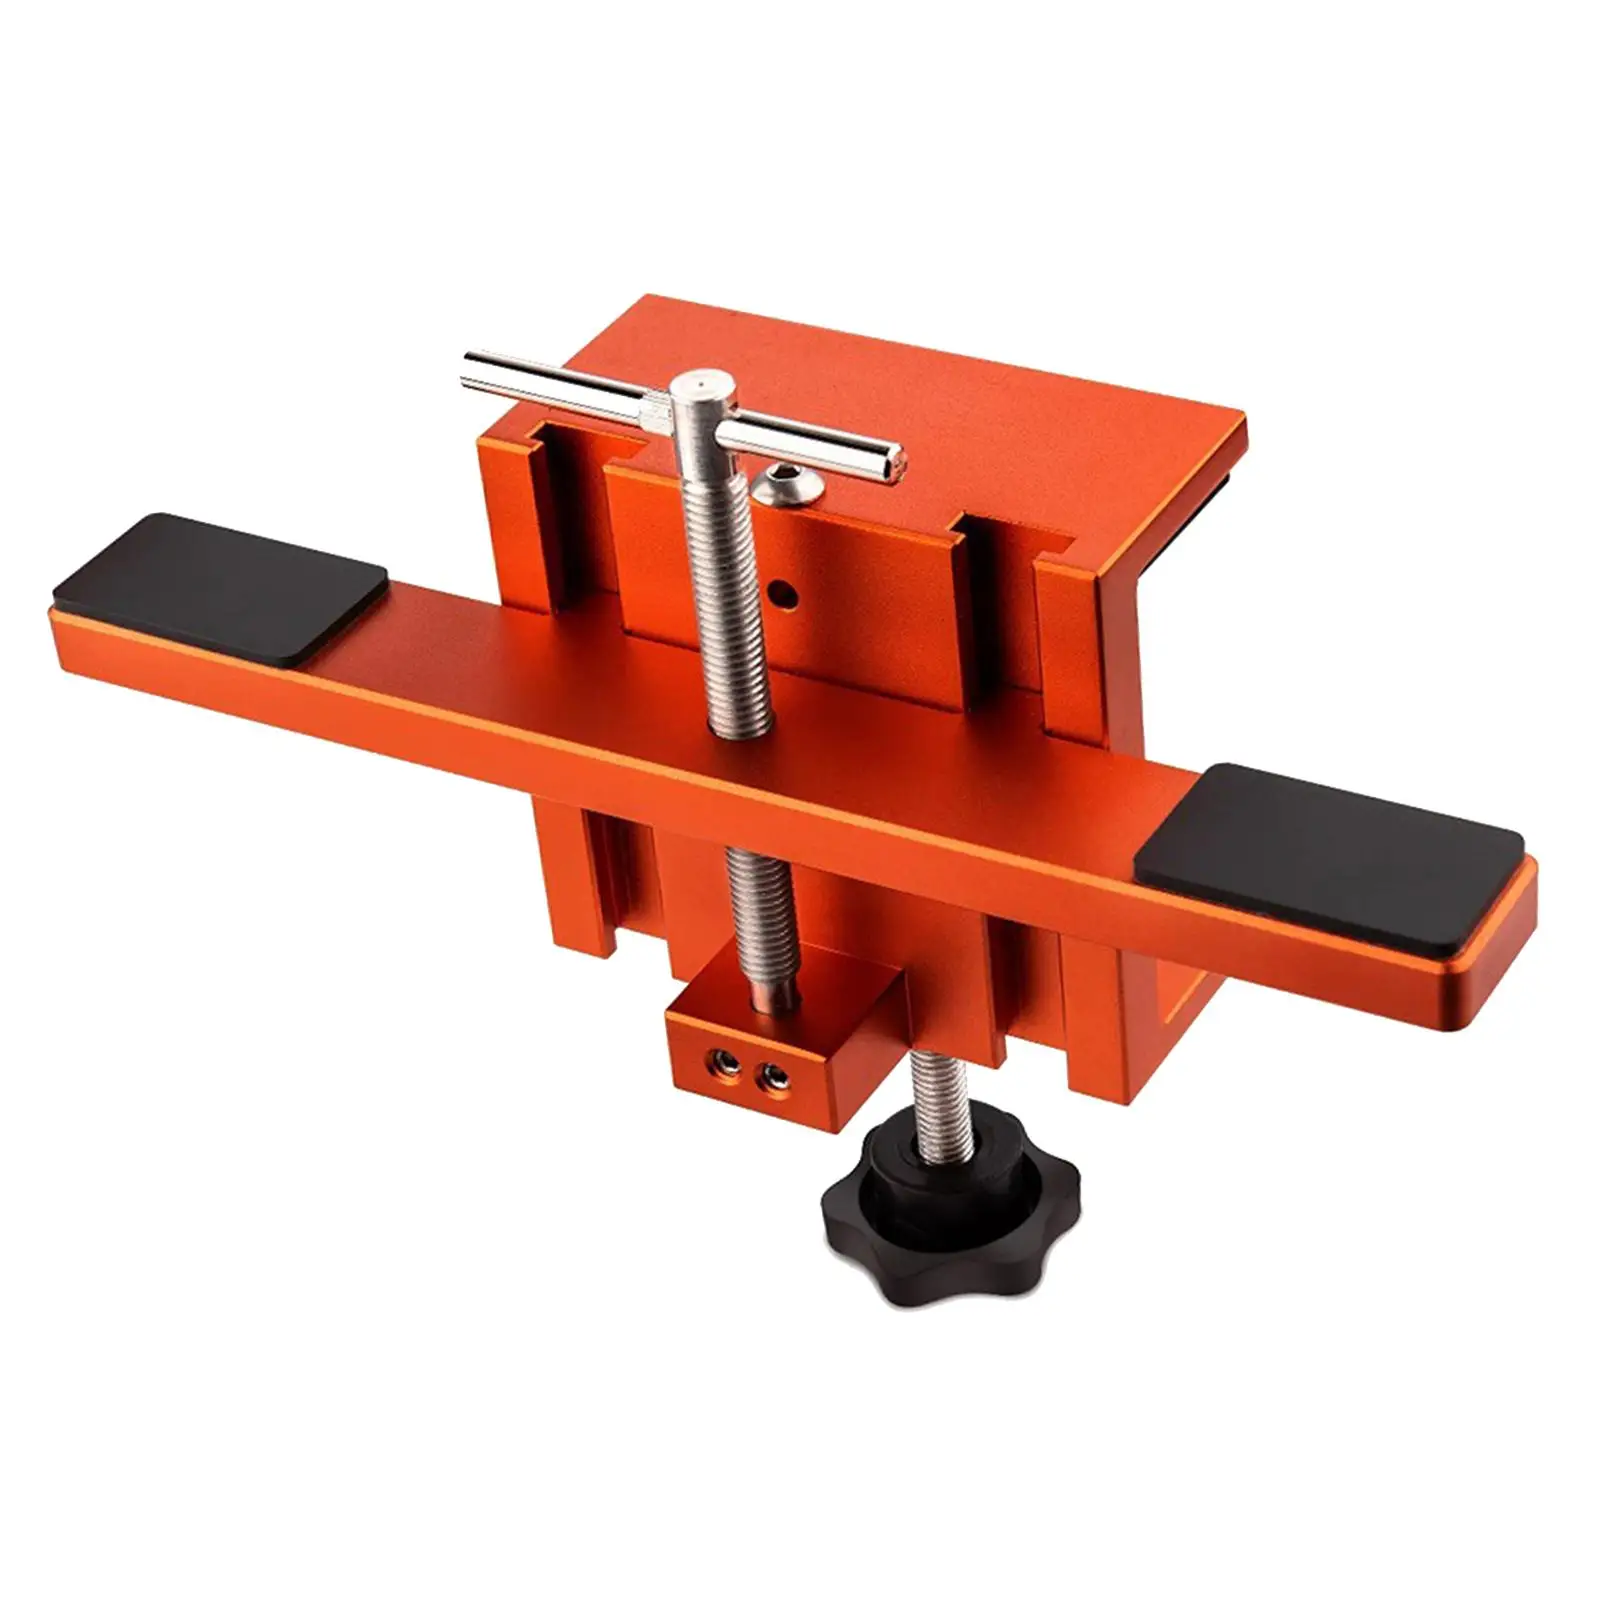 

Cabinet Door Mounting Jig CNC Aluminum Alloy with Small Wrench for Wood Furniture Positioning Frameless Cabinets Installation